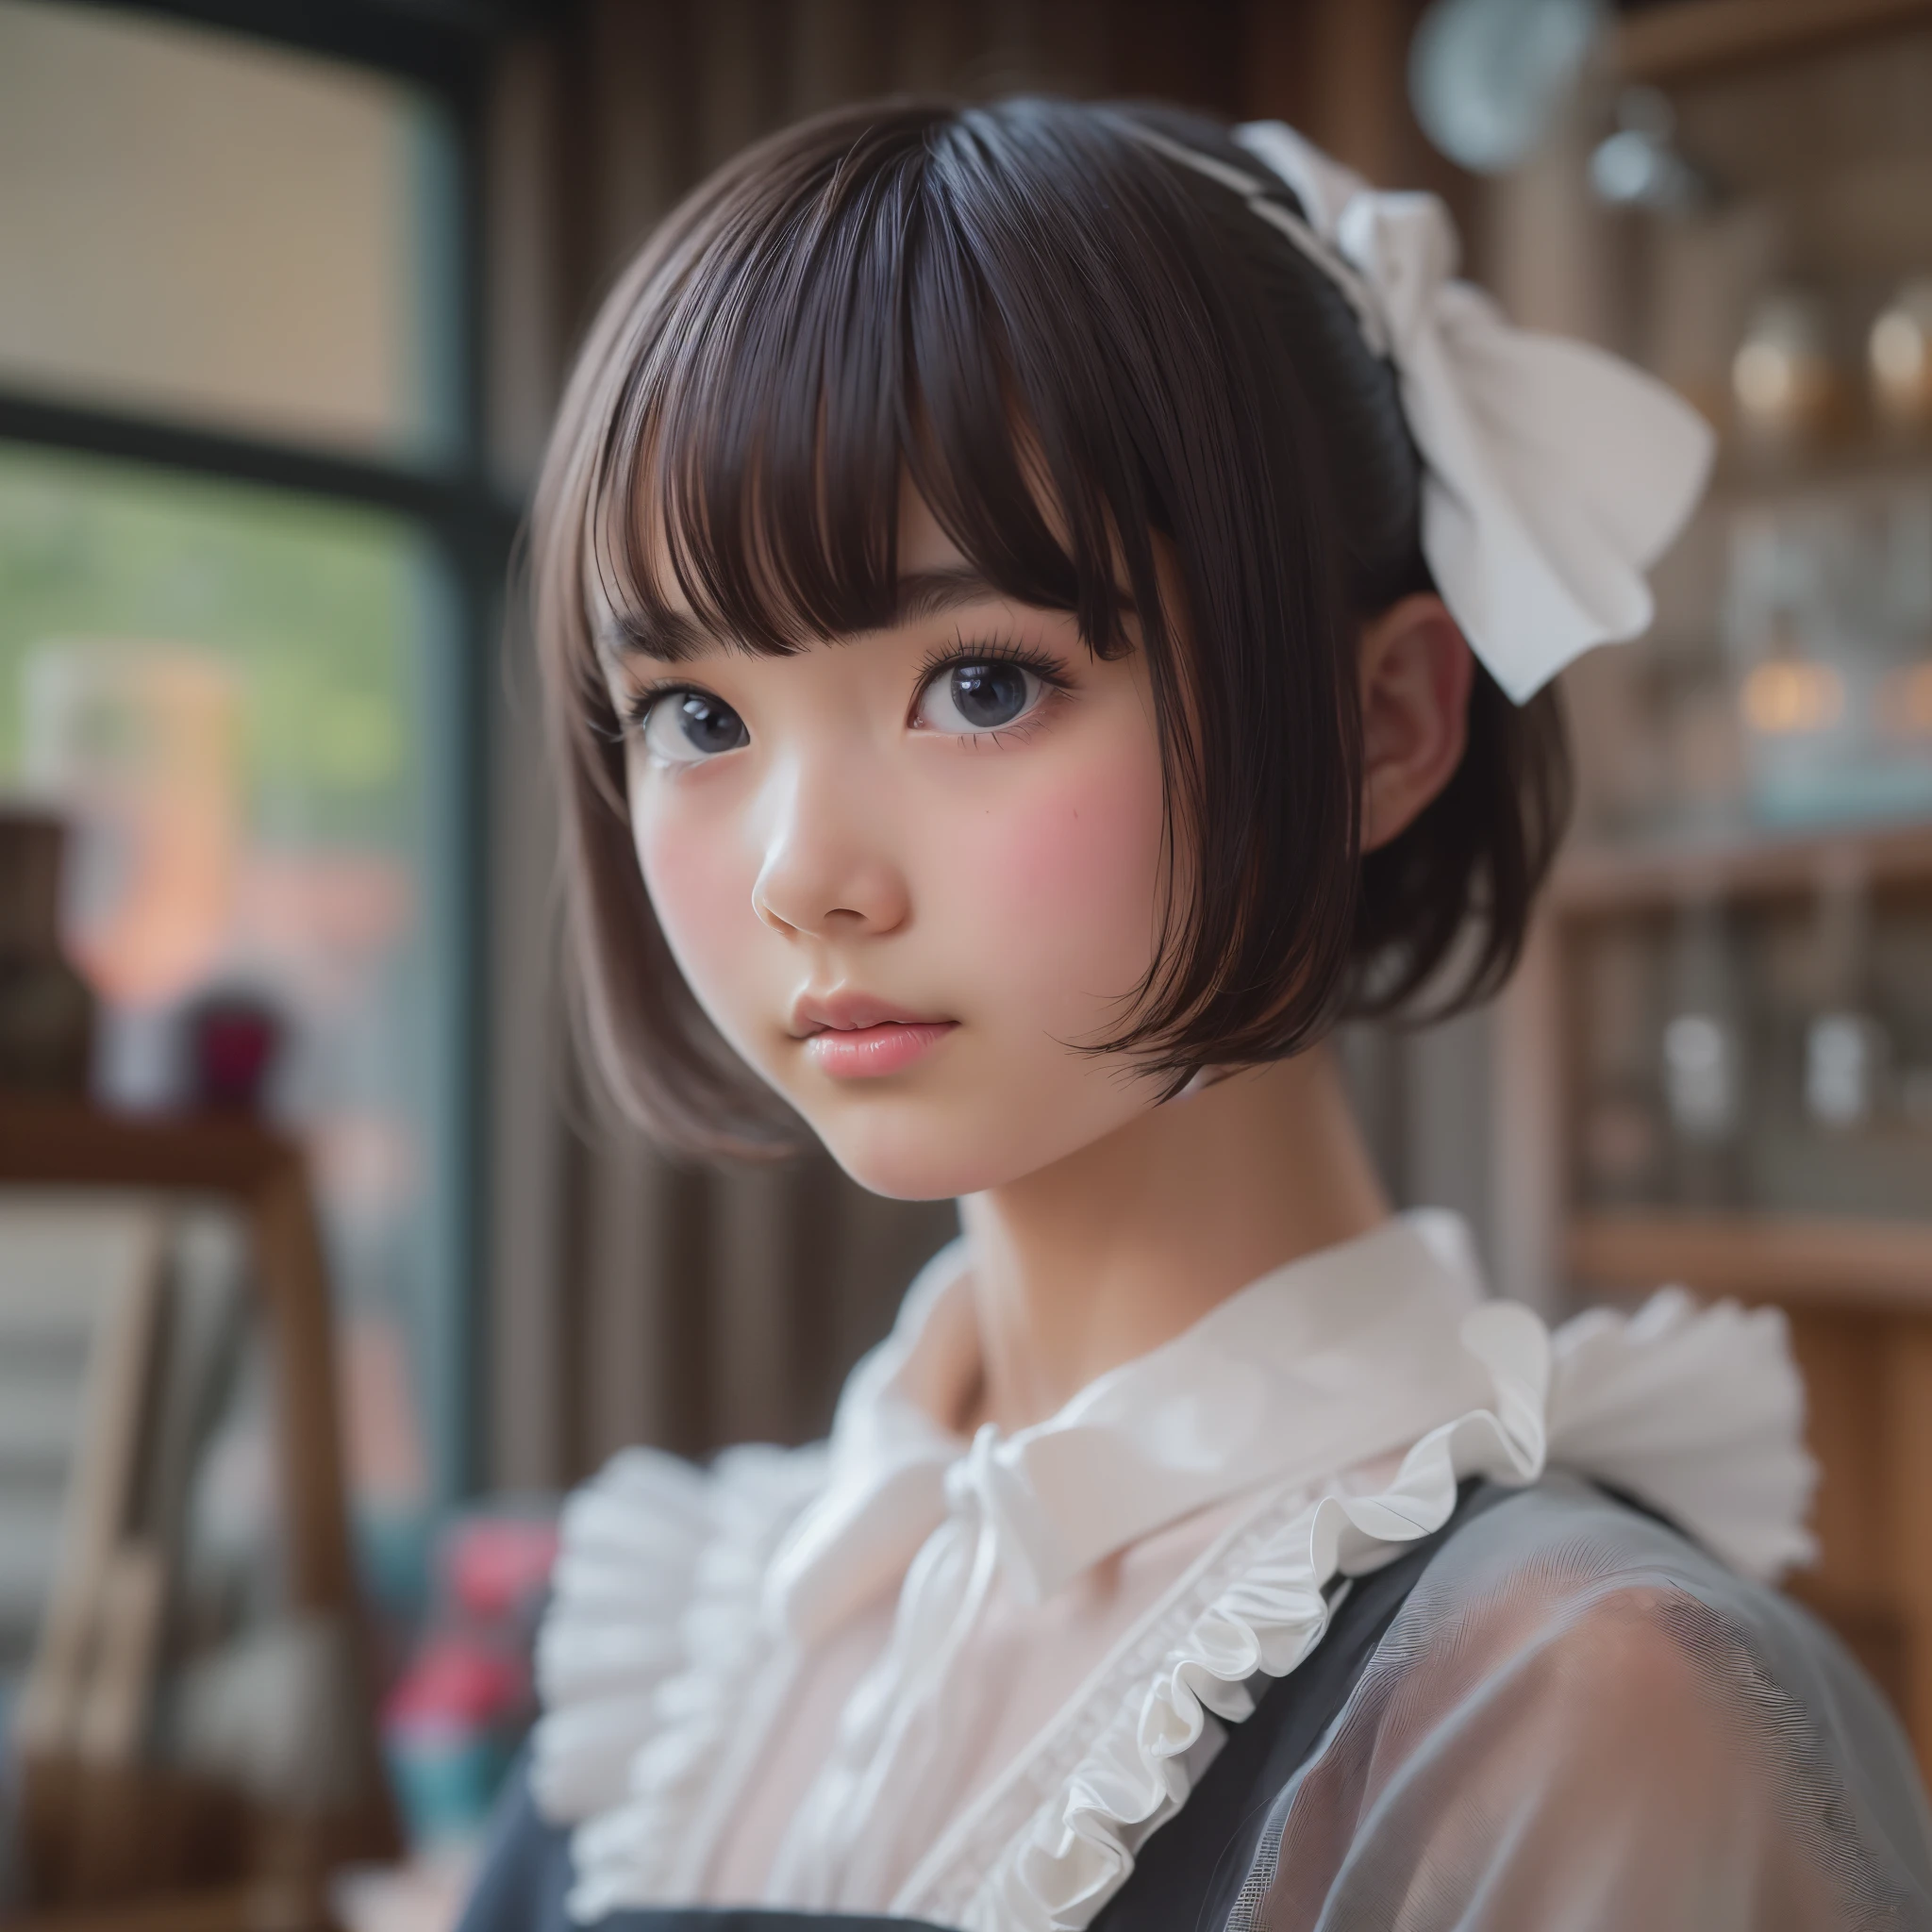 ((sfw:1.4)), (( extra short hair, sidelocks-hair, 1Girl)), Ultra High Resolution, (Realistic:1.4), RAW Photo, Best Quality, (Photorealistic), Focus, Soft Light, ((15 years old)), ((Japanese)), (( (young face))), (surface), (depth of field), masterpiece, (realistic), wearing highly detailed (( maid clothes with frills and ribbon)), bangs, ((1 girl)),.(looking at viewer:1.2)

